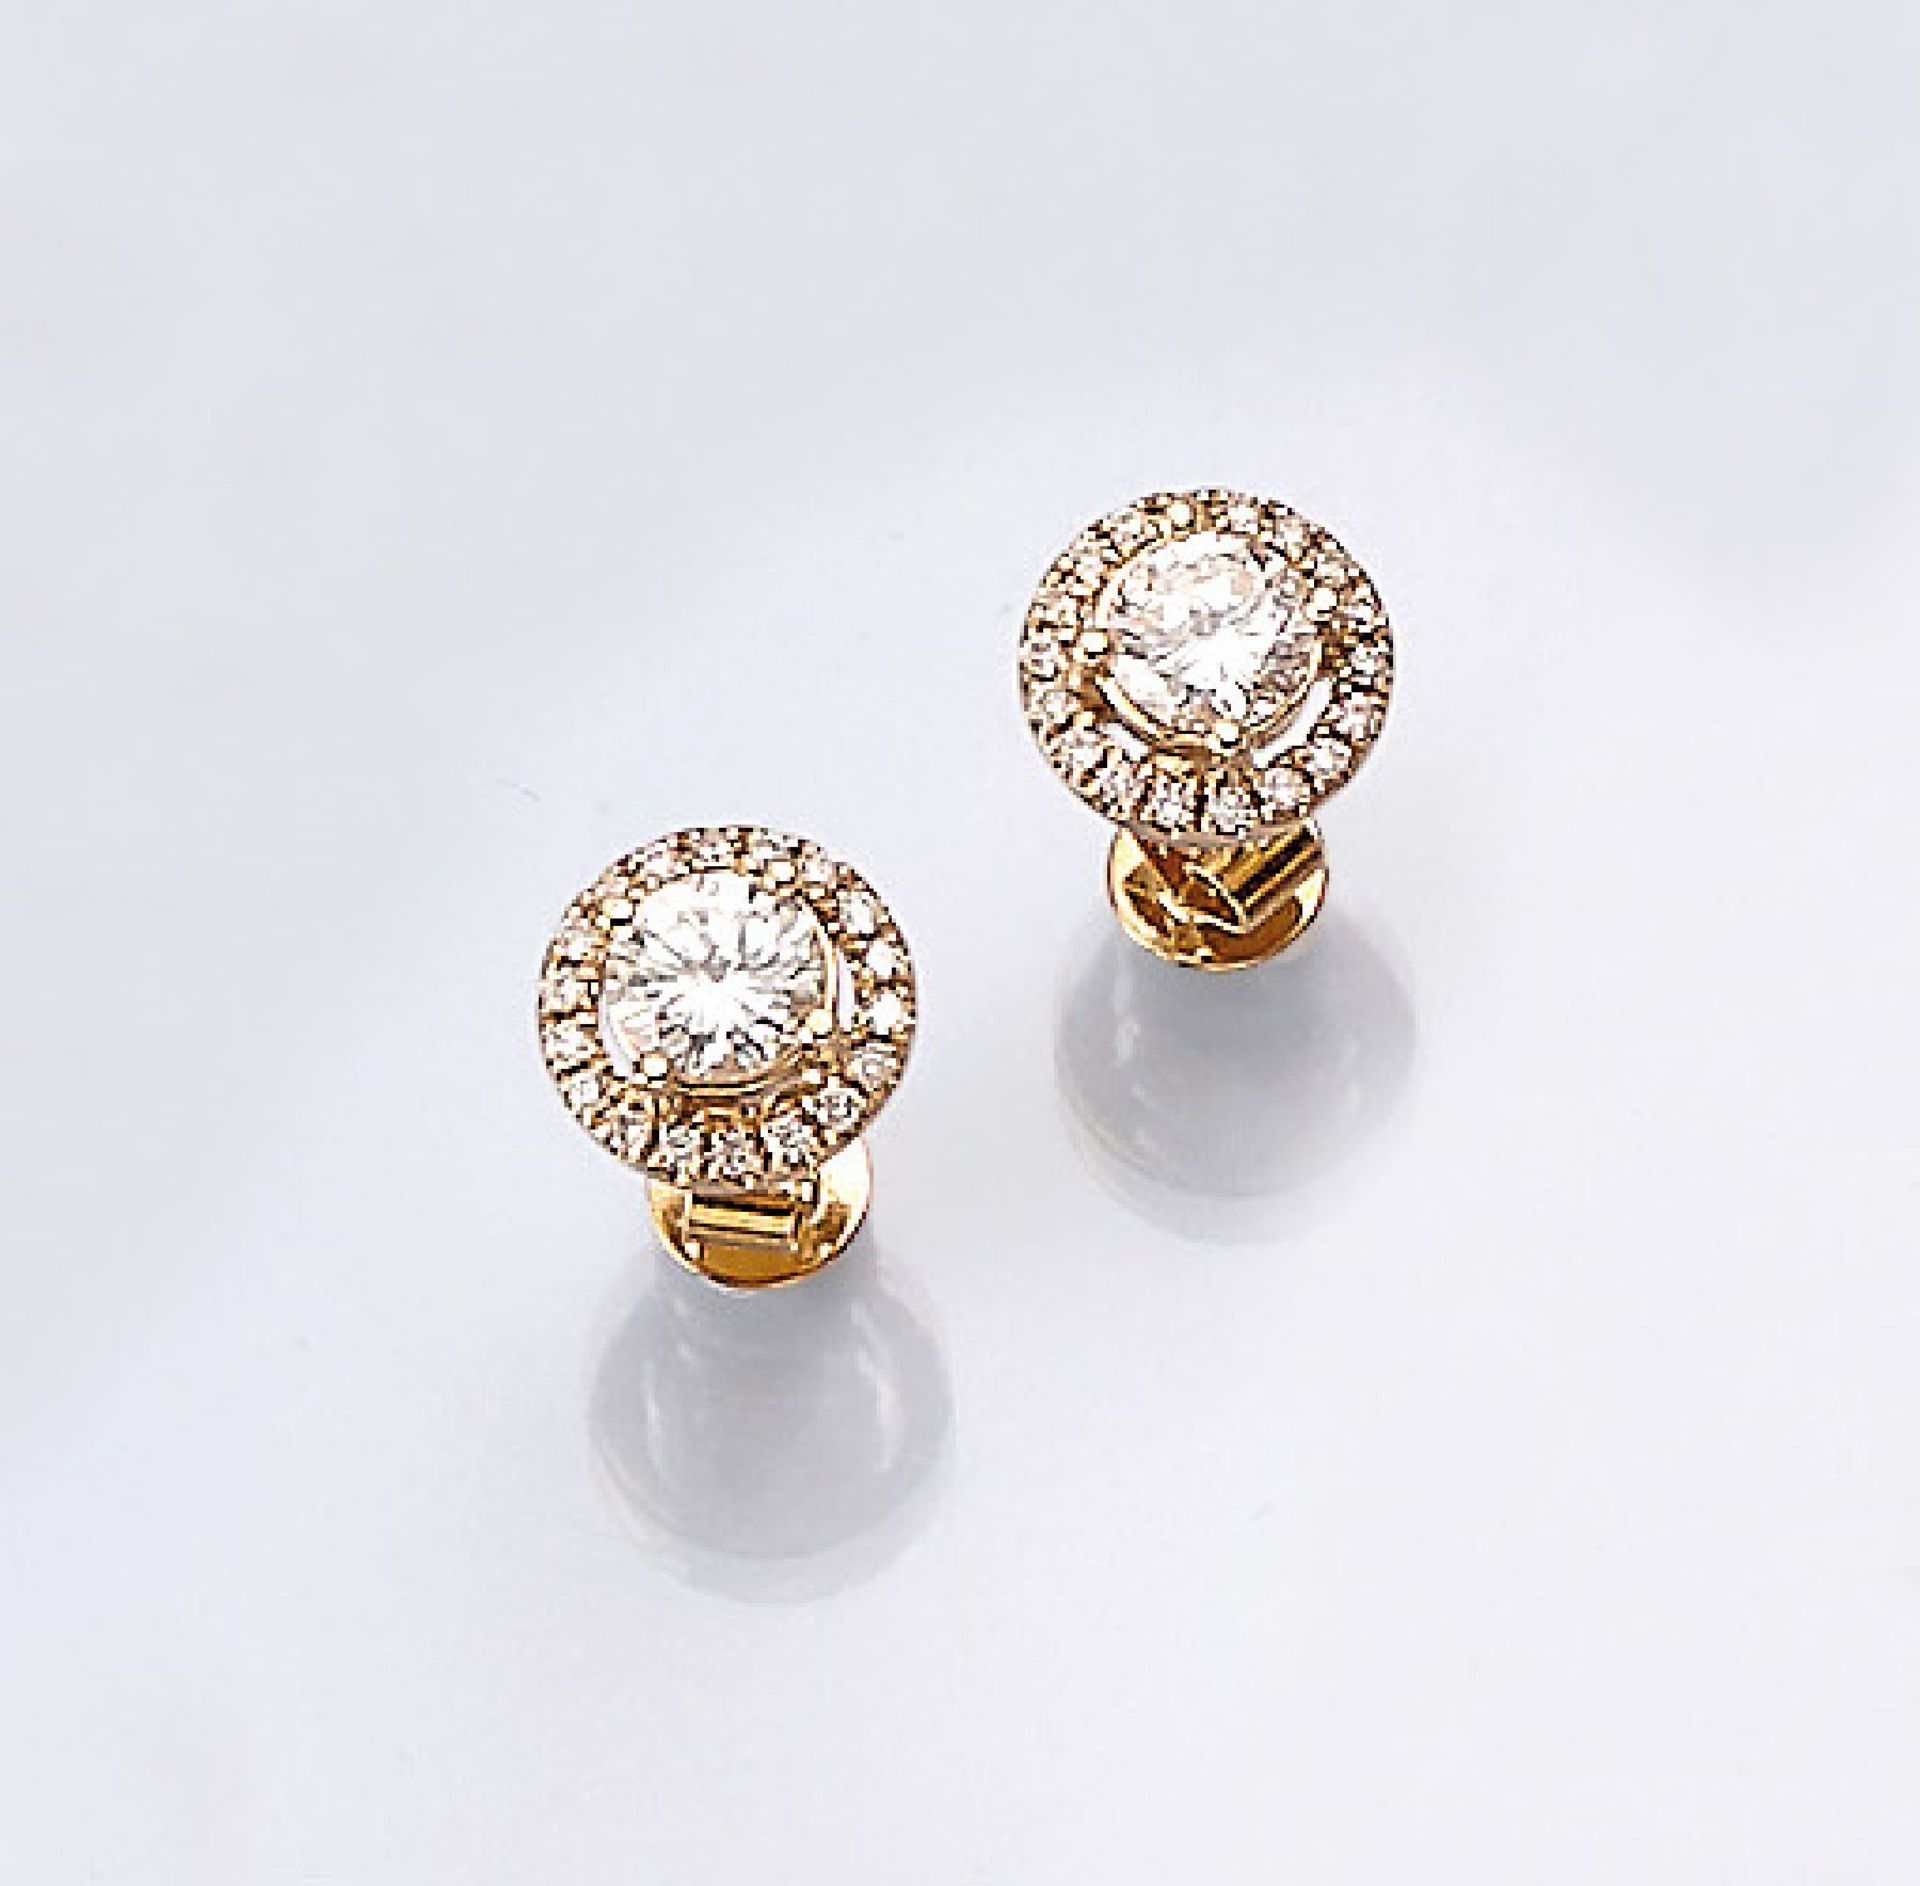 Pair of 18 kt gold earrings with brilliants , YG 750/000, 2 brilliants total approx. 0.81 ct